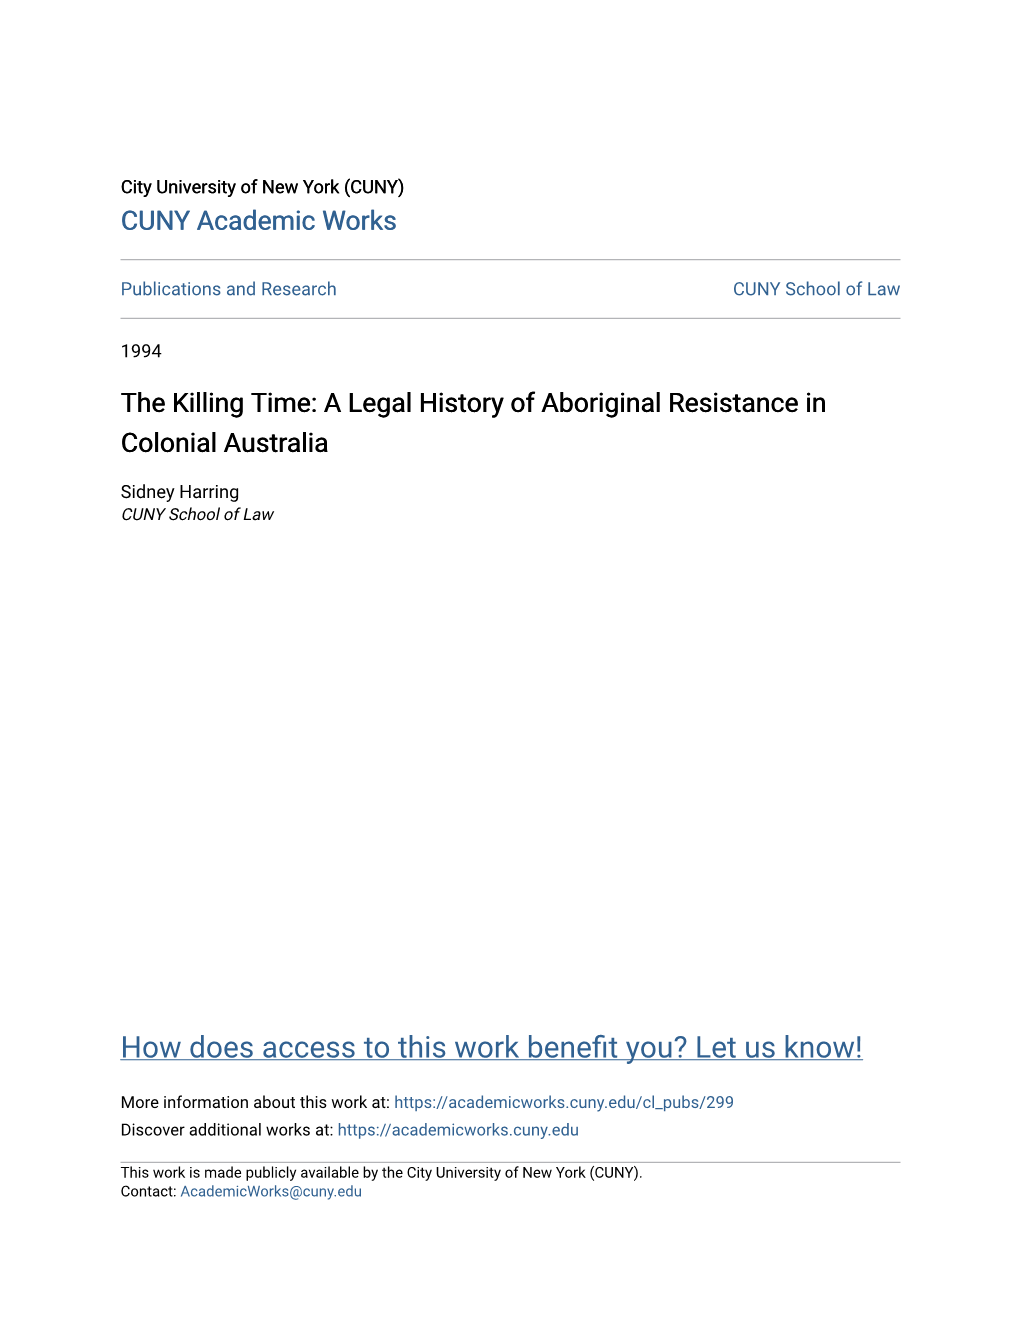 The Killing Time: a Legal History of Aboriginal Resistance in Colonial Australia